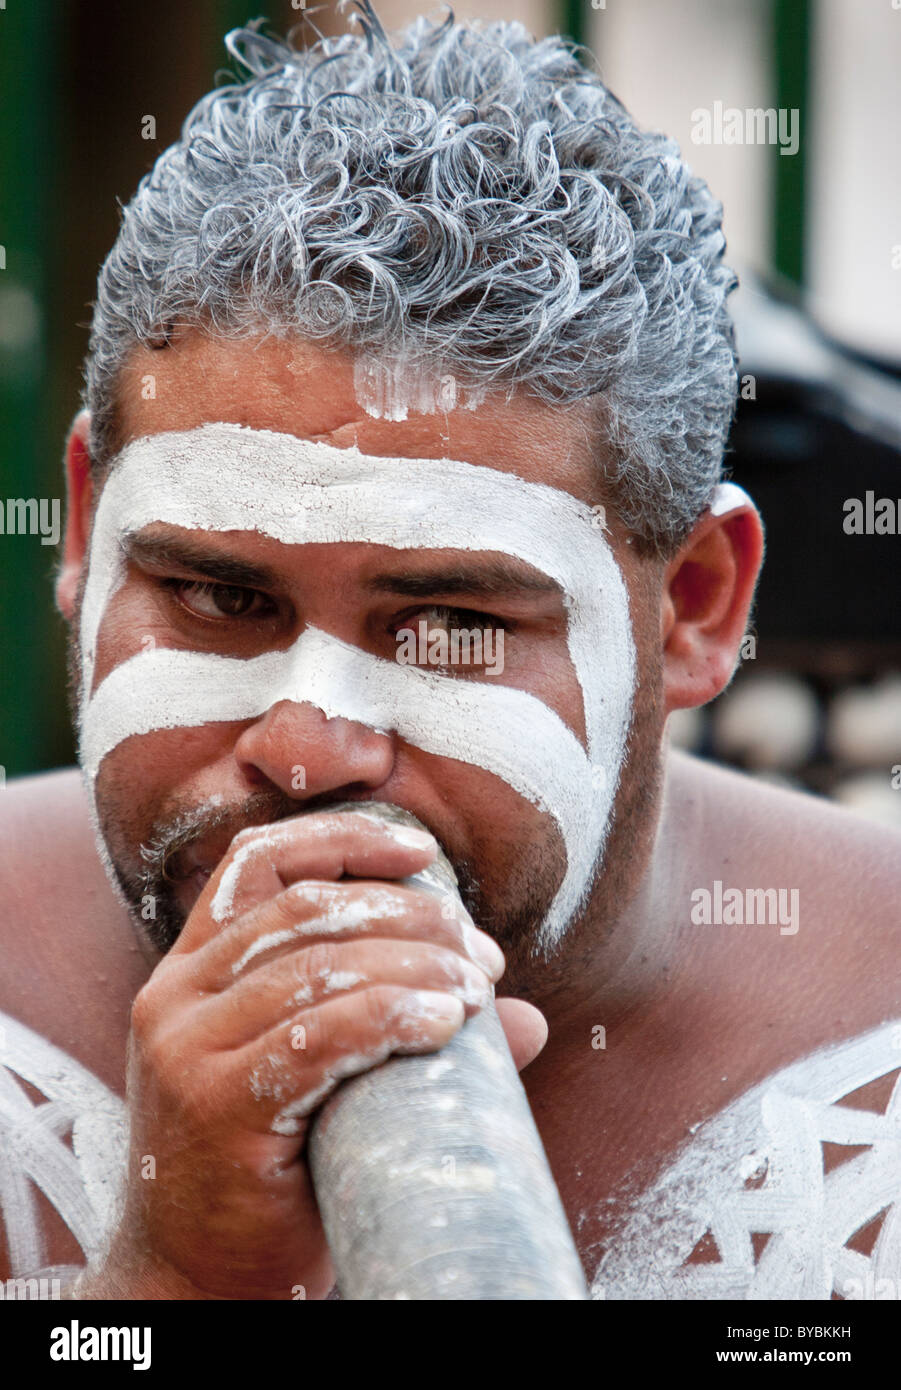 Didgeridoo player with traditional body paint performing in the street at Sydney Stock Photo